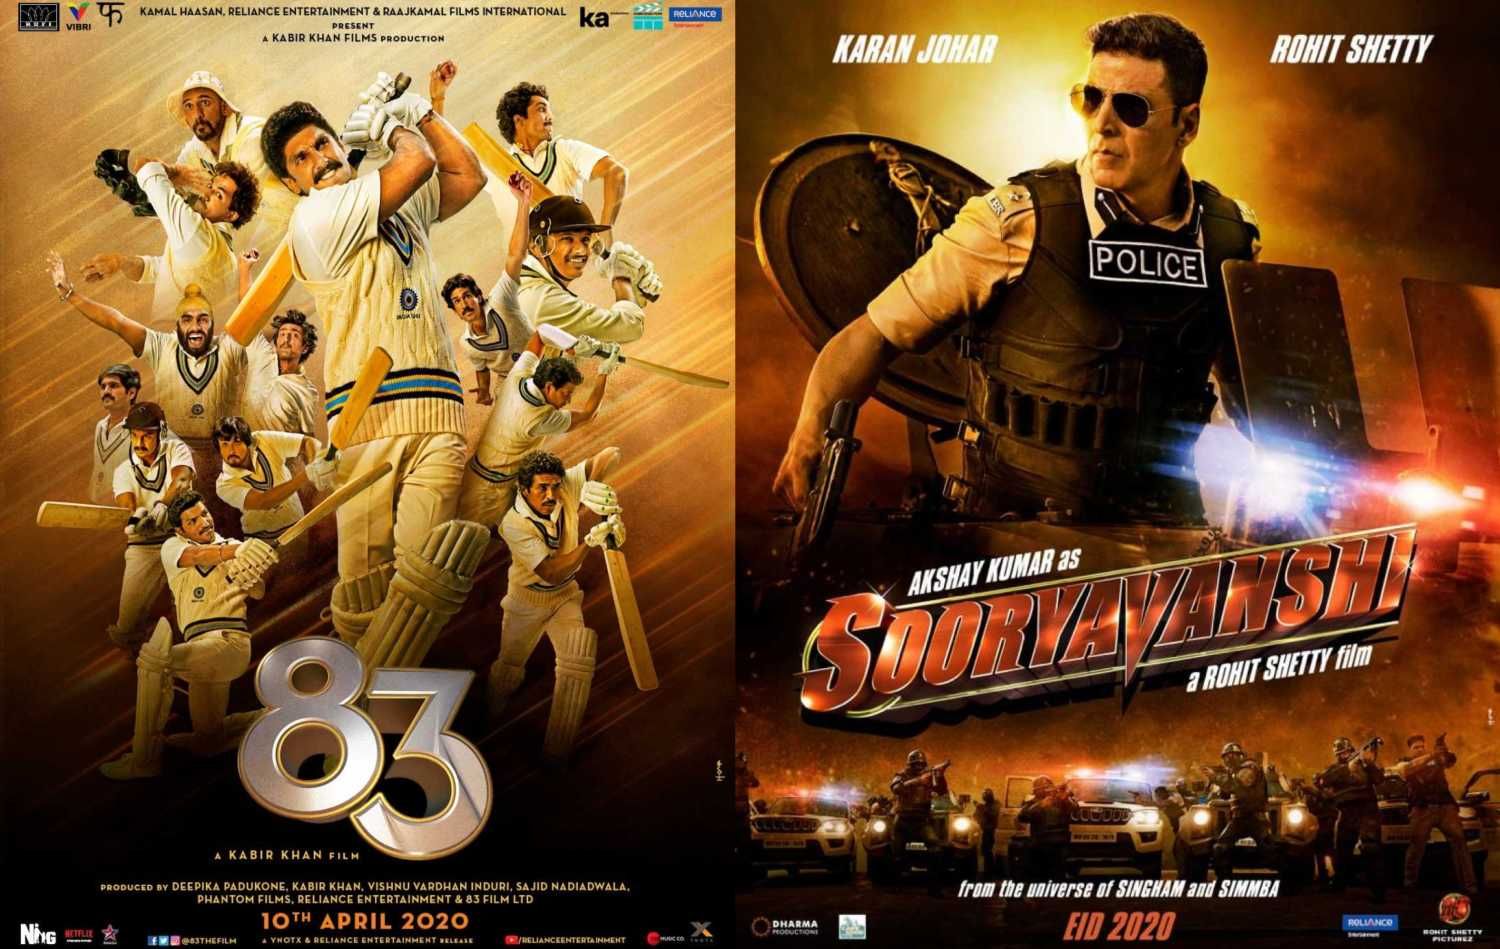 Sooryavanshi And '83 Might Take The OTT Route, Makers Not Keen To Delay Release Beyond This Year